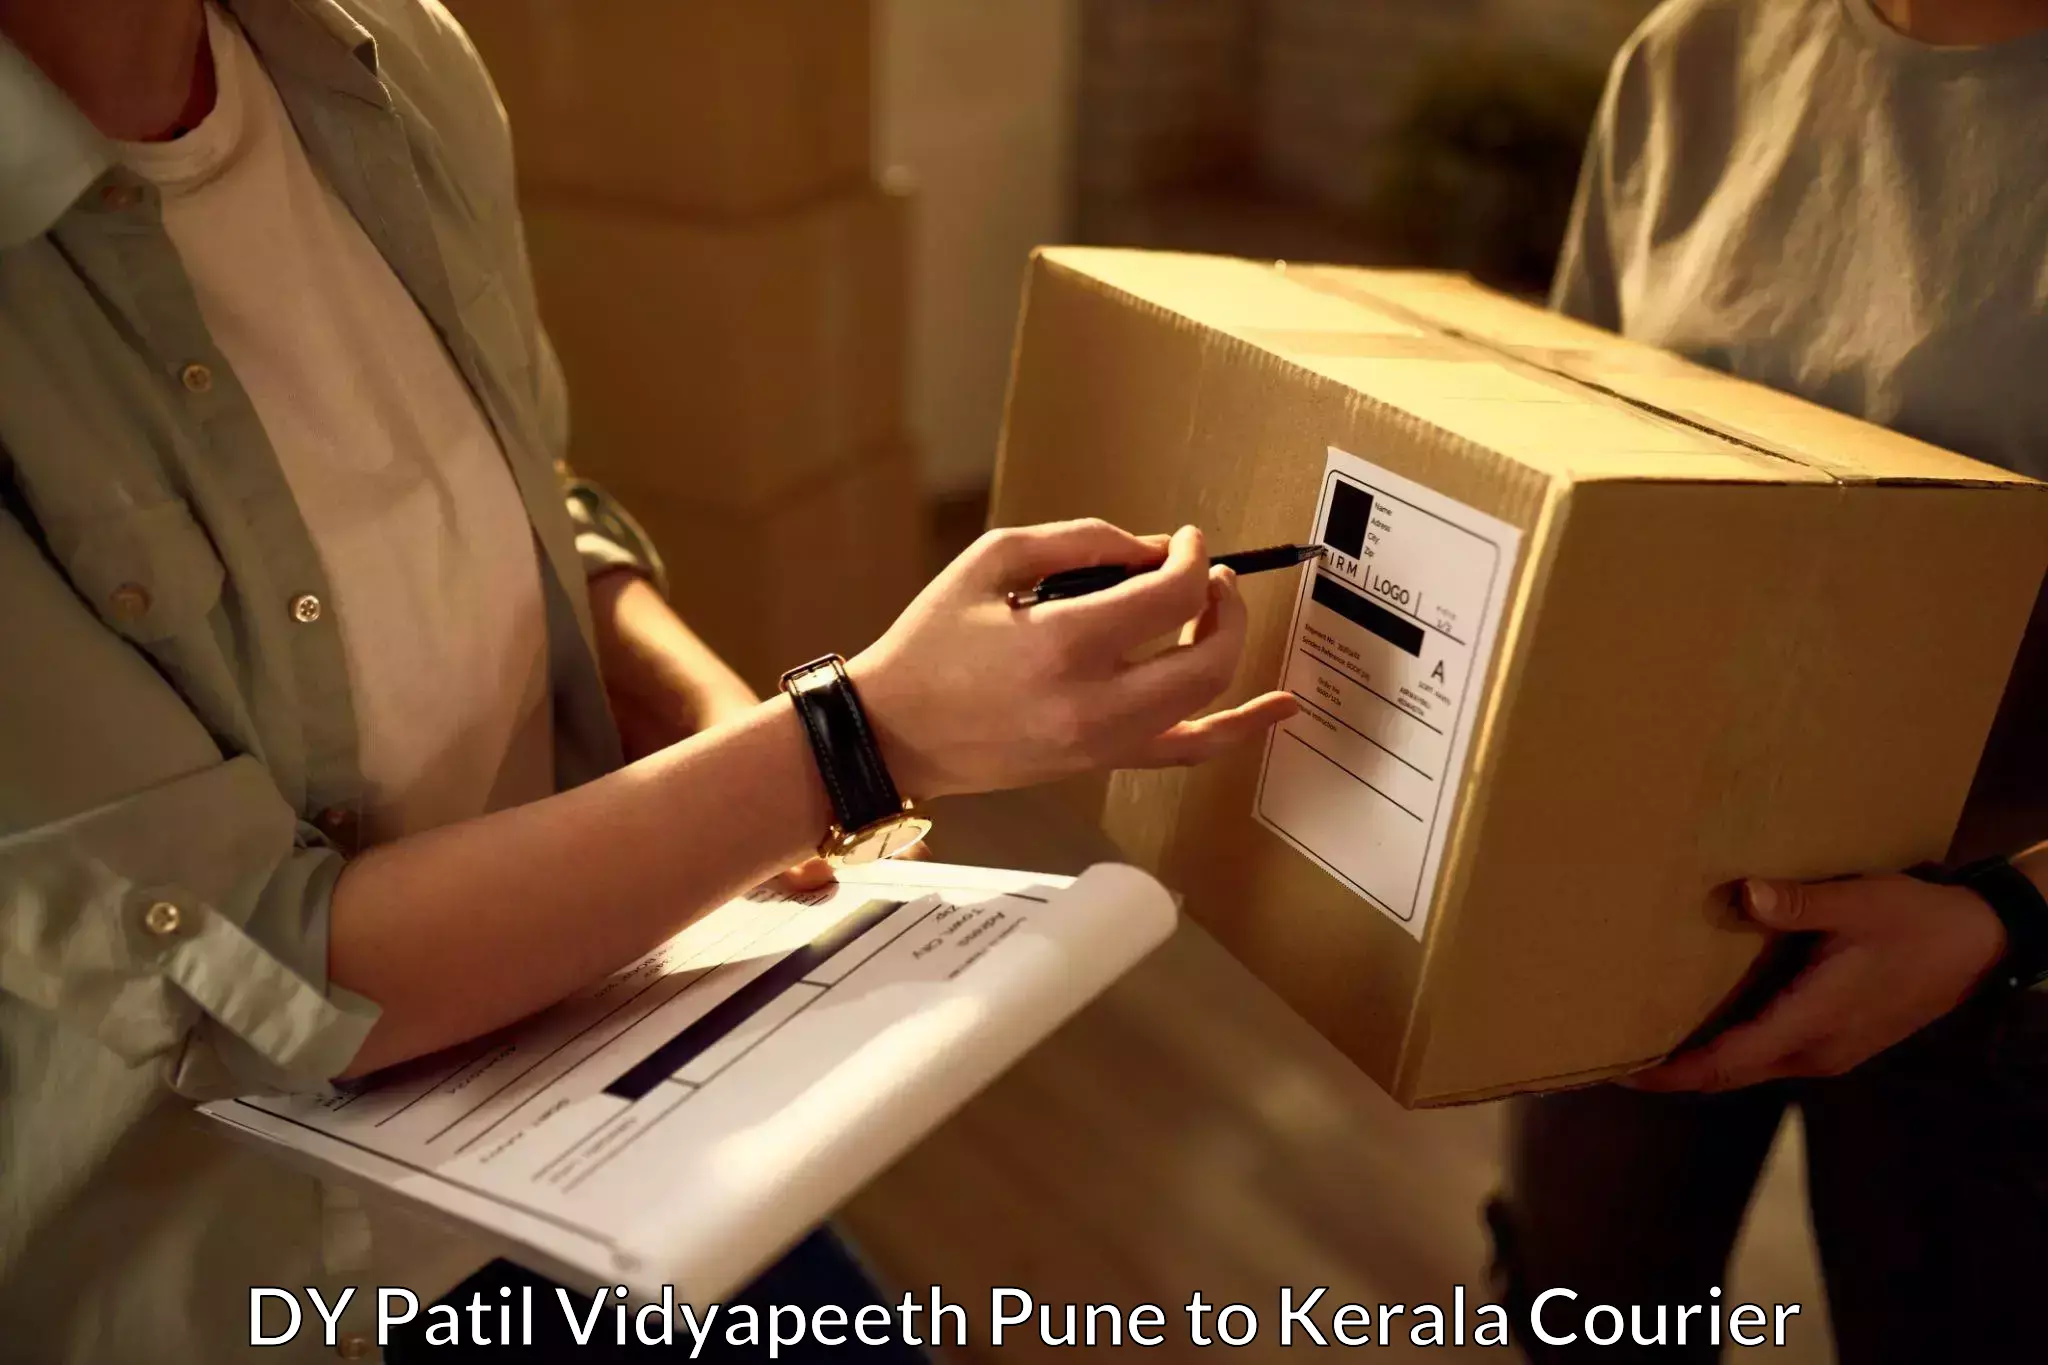 Express delivery capabilities in DY Patil Vidyapeeth Pune to Adimali